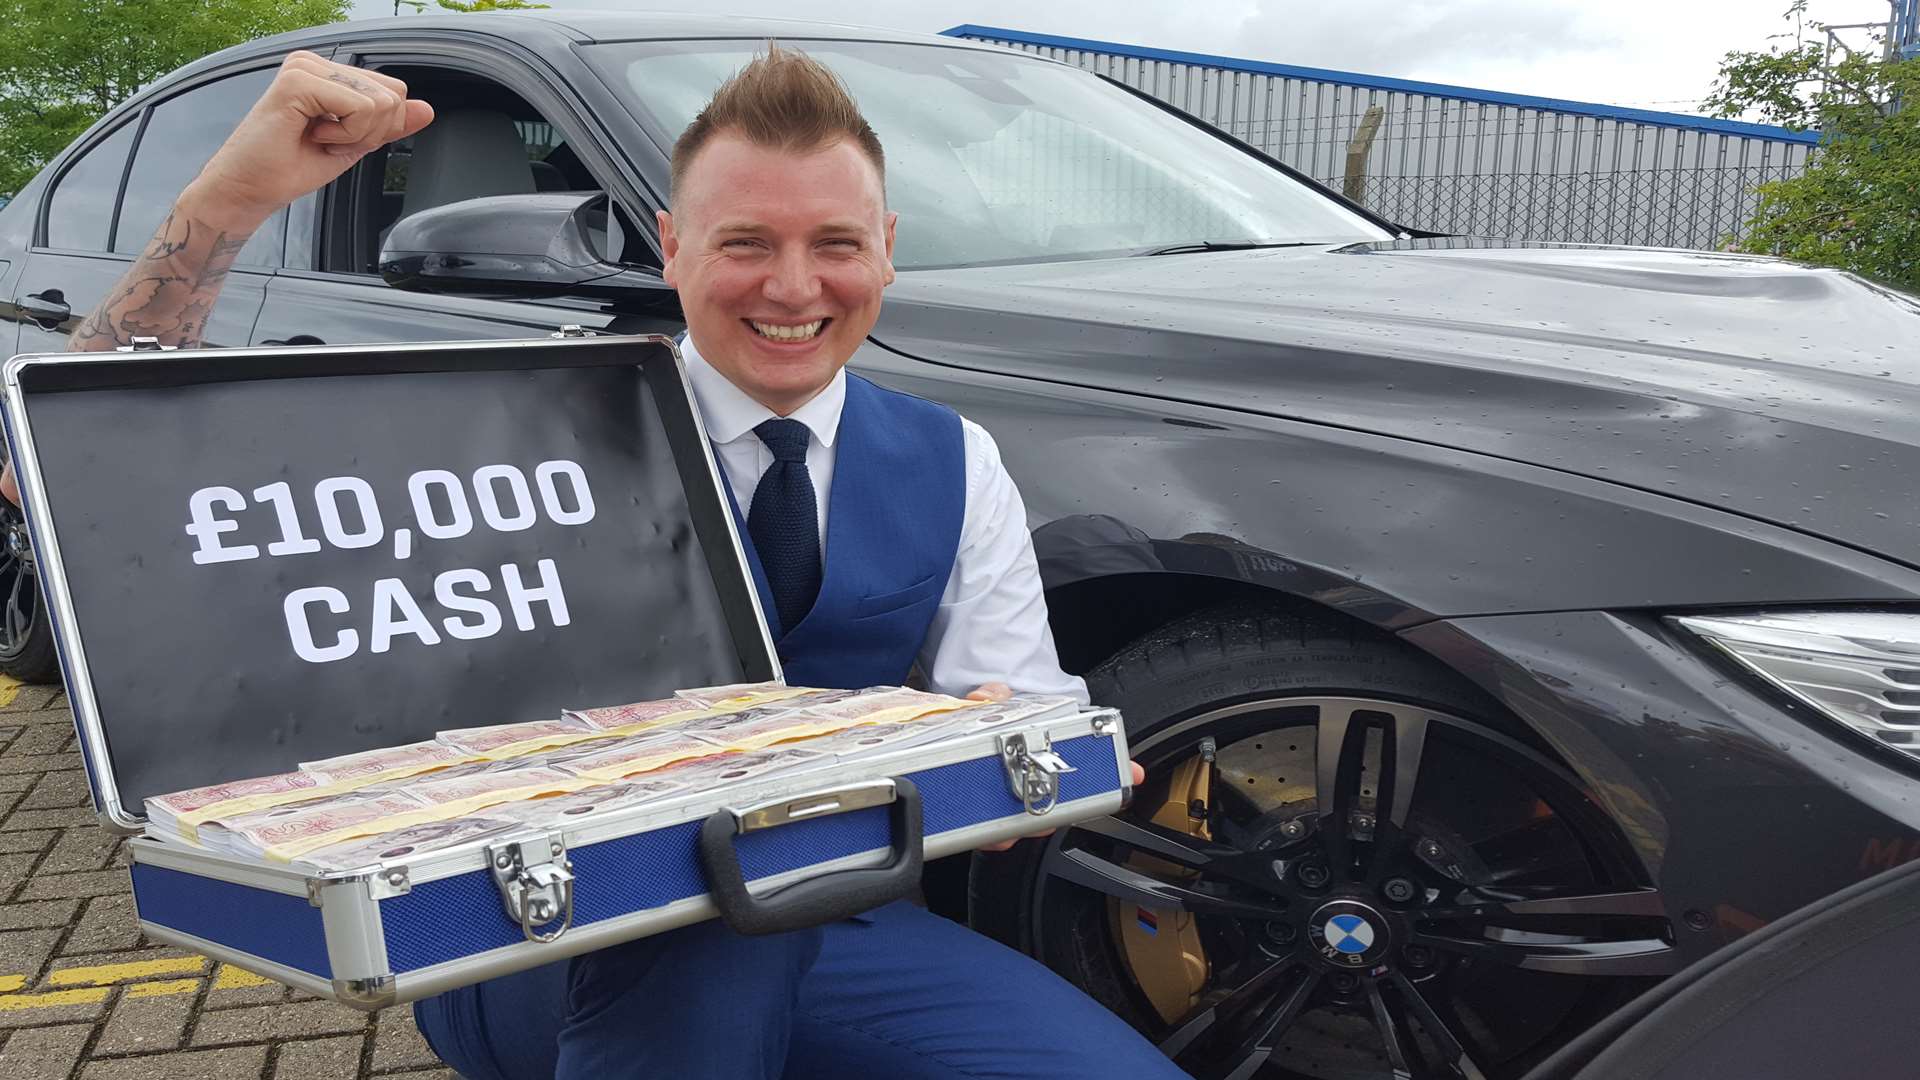 Spencer Hill who won a new £55,000 BMW and £10,000 in cash